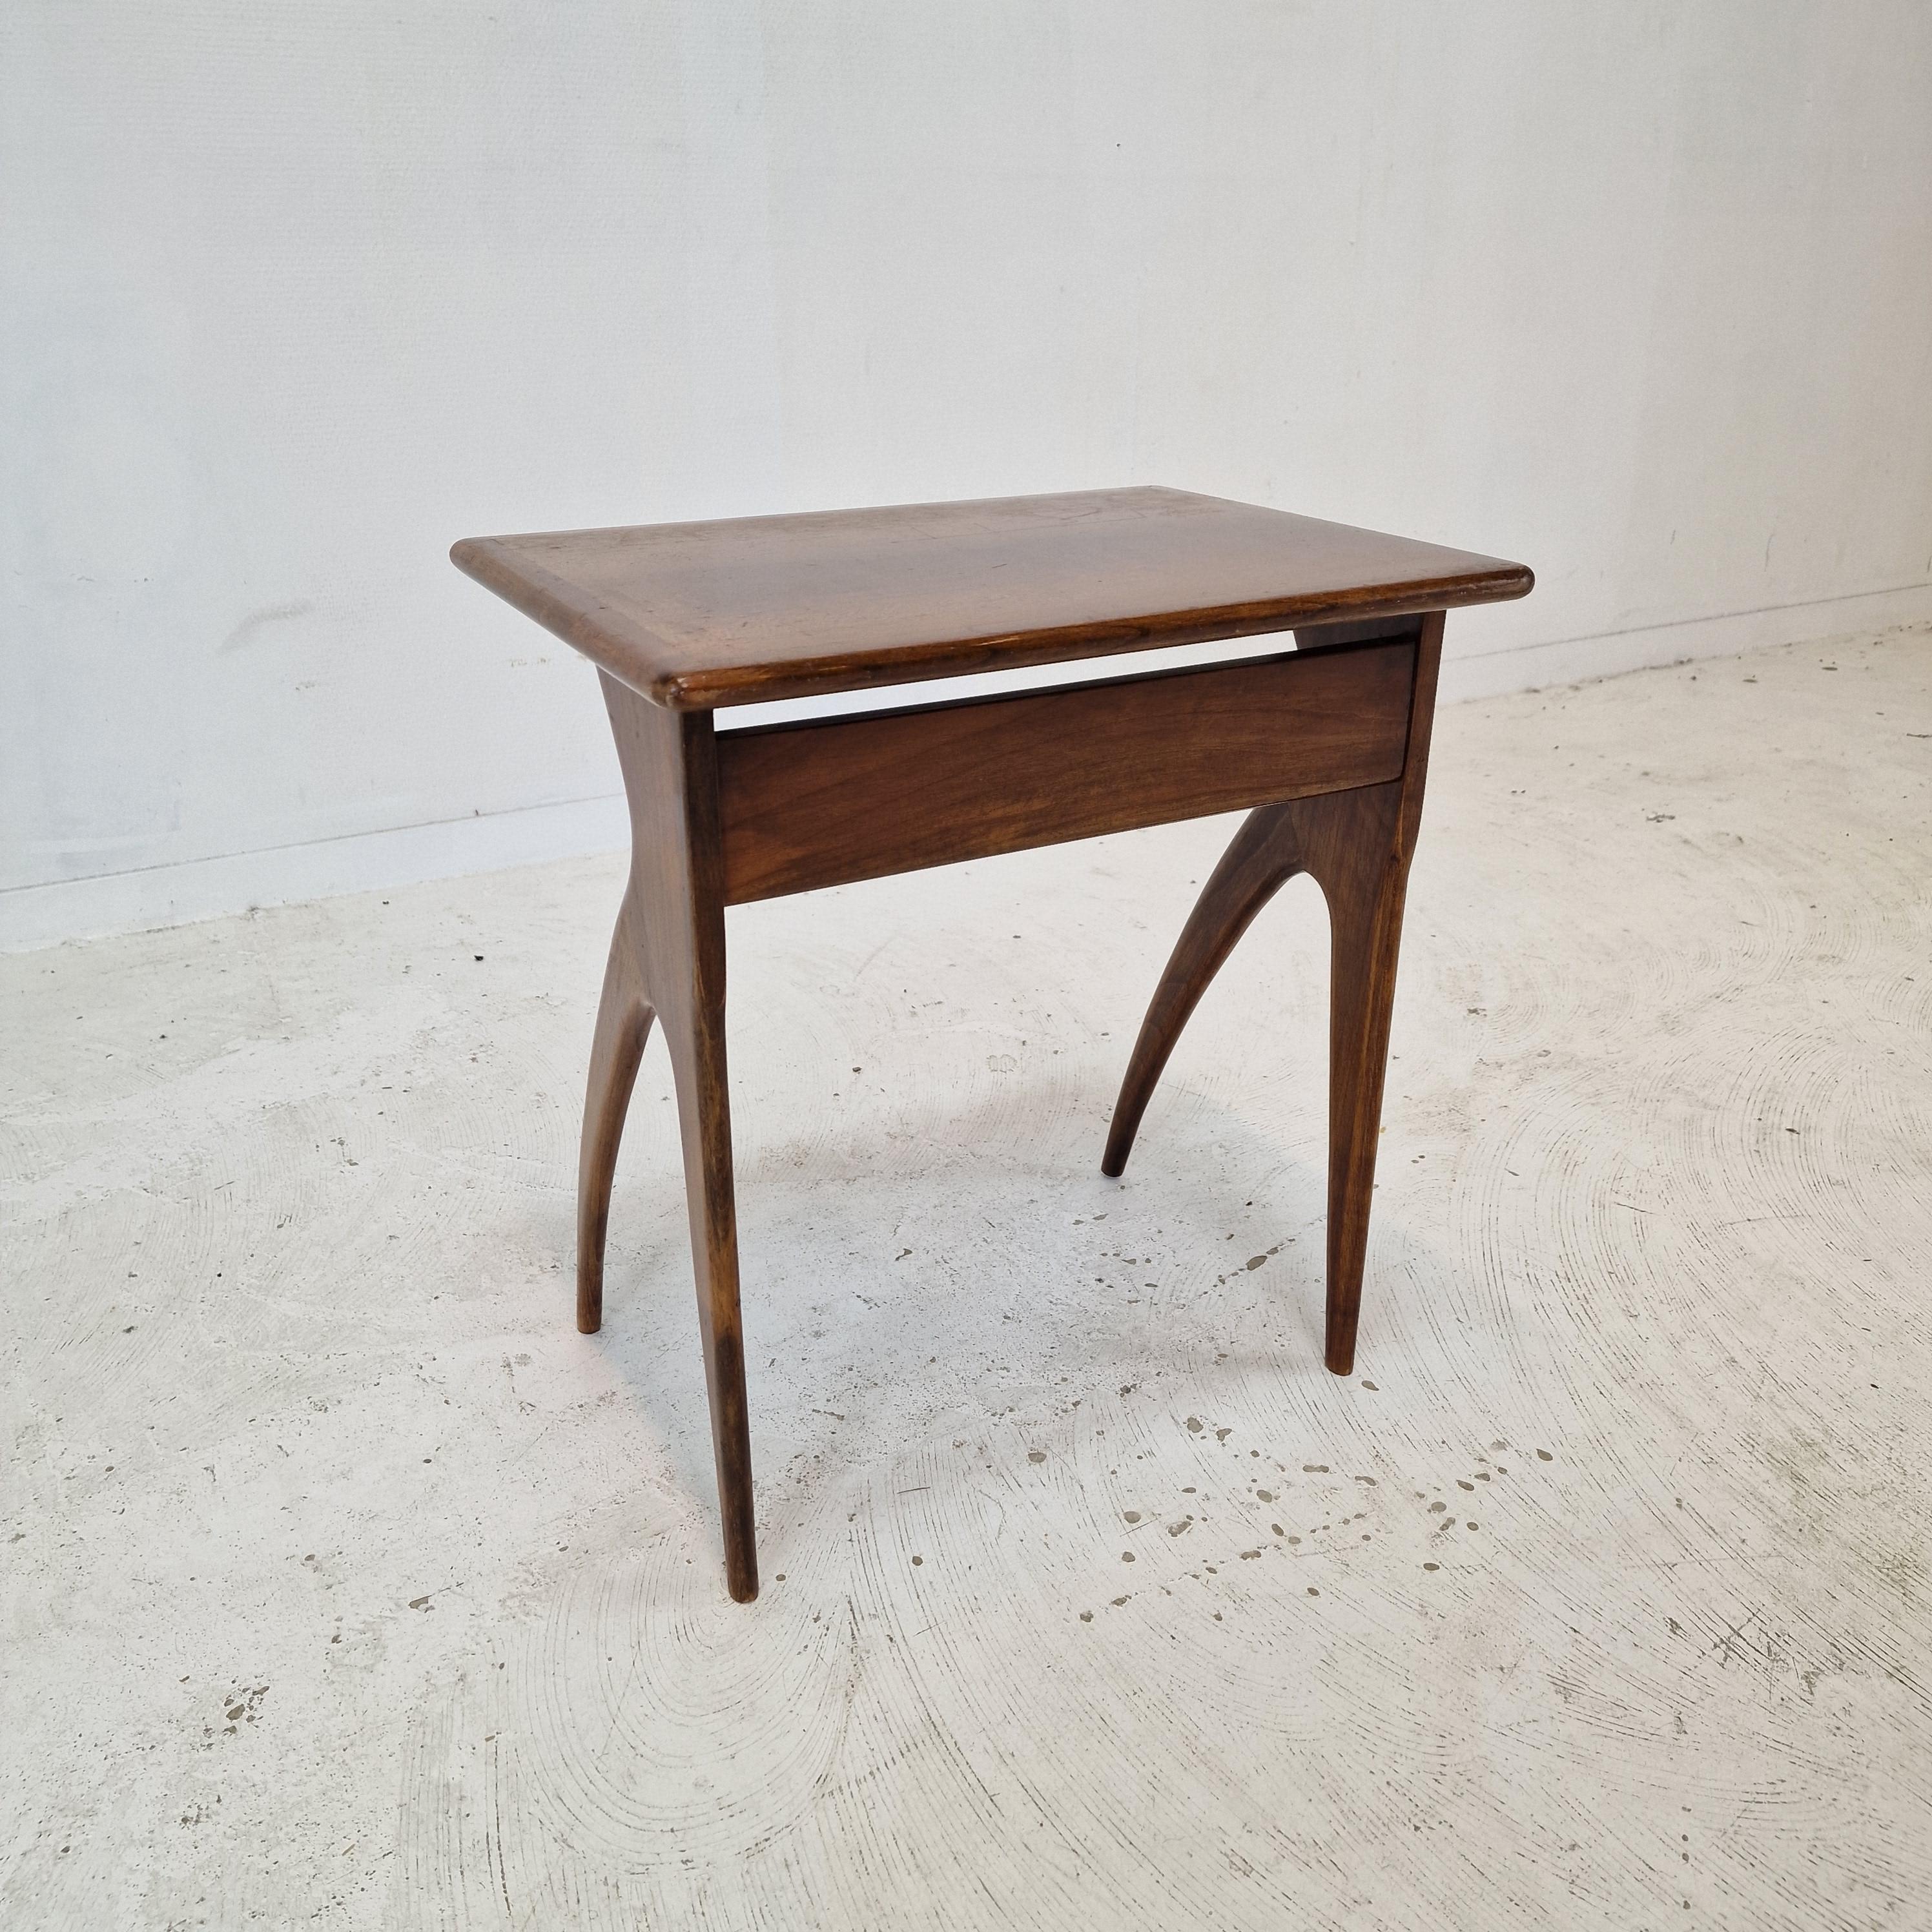 Italian Wooden Side Table, 1930s For Sale 8